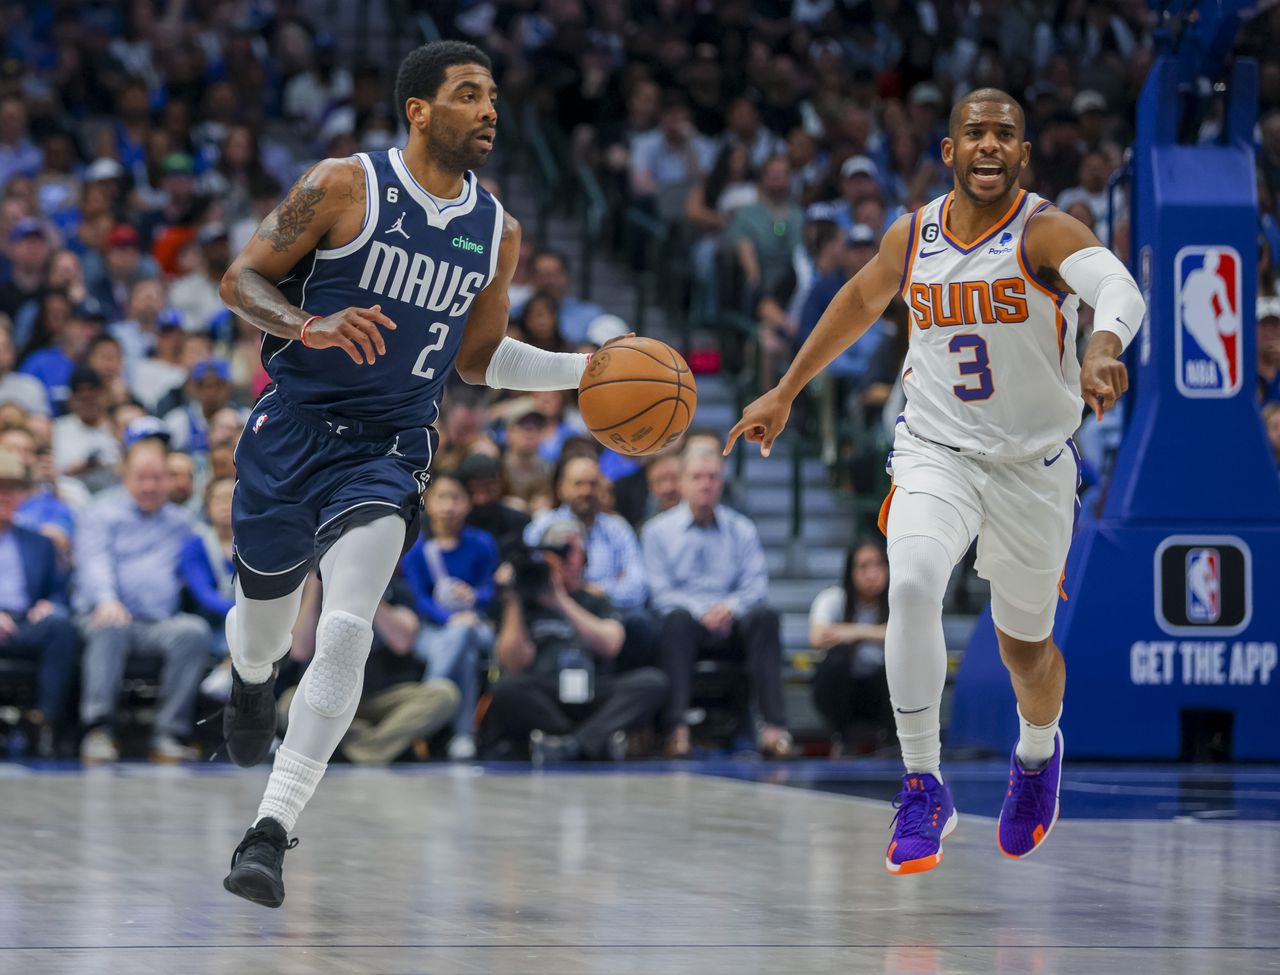 Playing buy or sell with Suns 2023 free agents (plus a few more